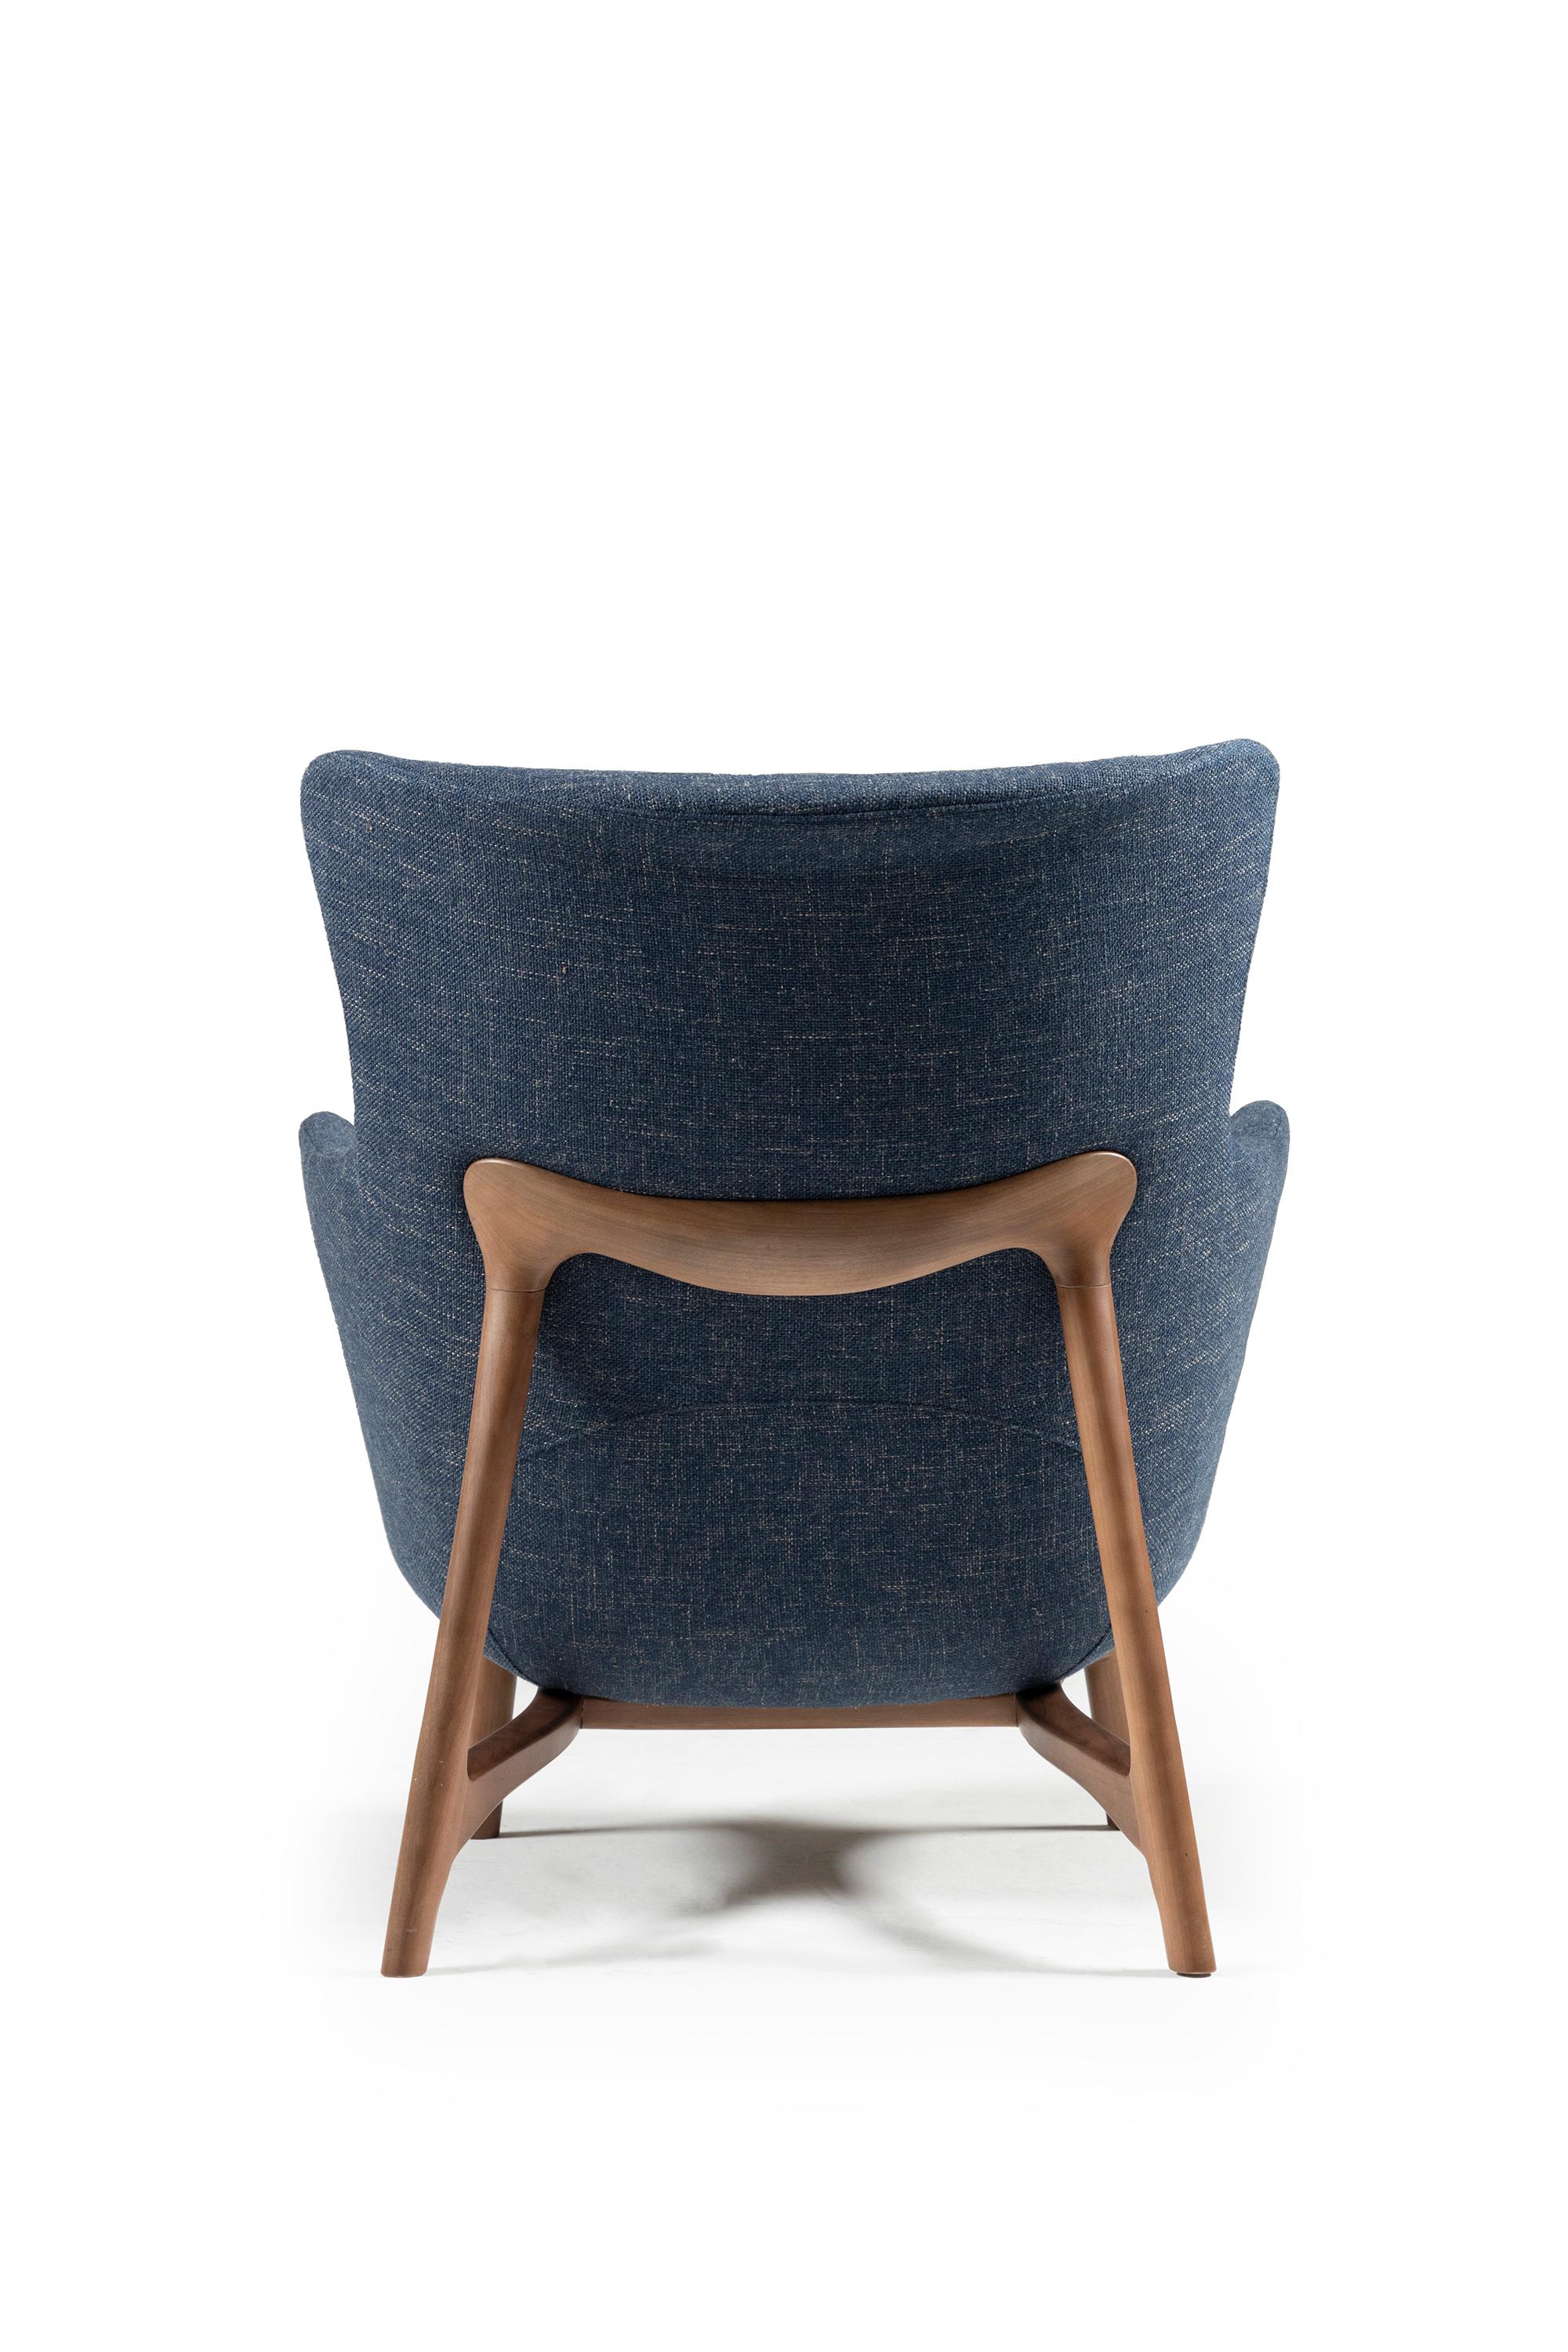 Modern Sublime Armchairs, Contemporary Style in Solid Wood, Textiles Upholstery.  For Sale